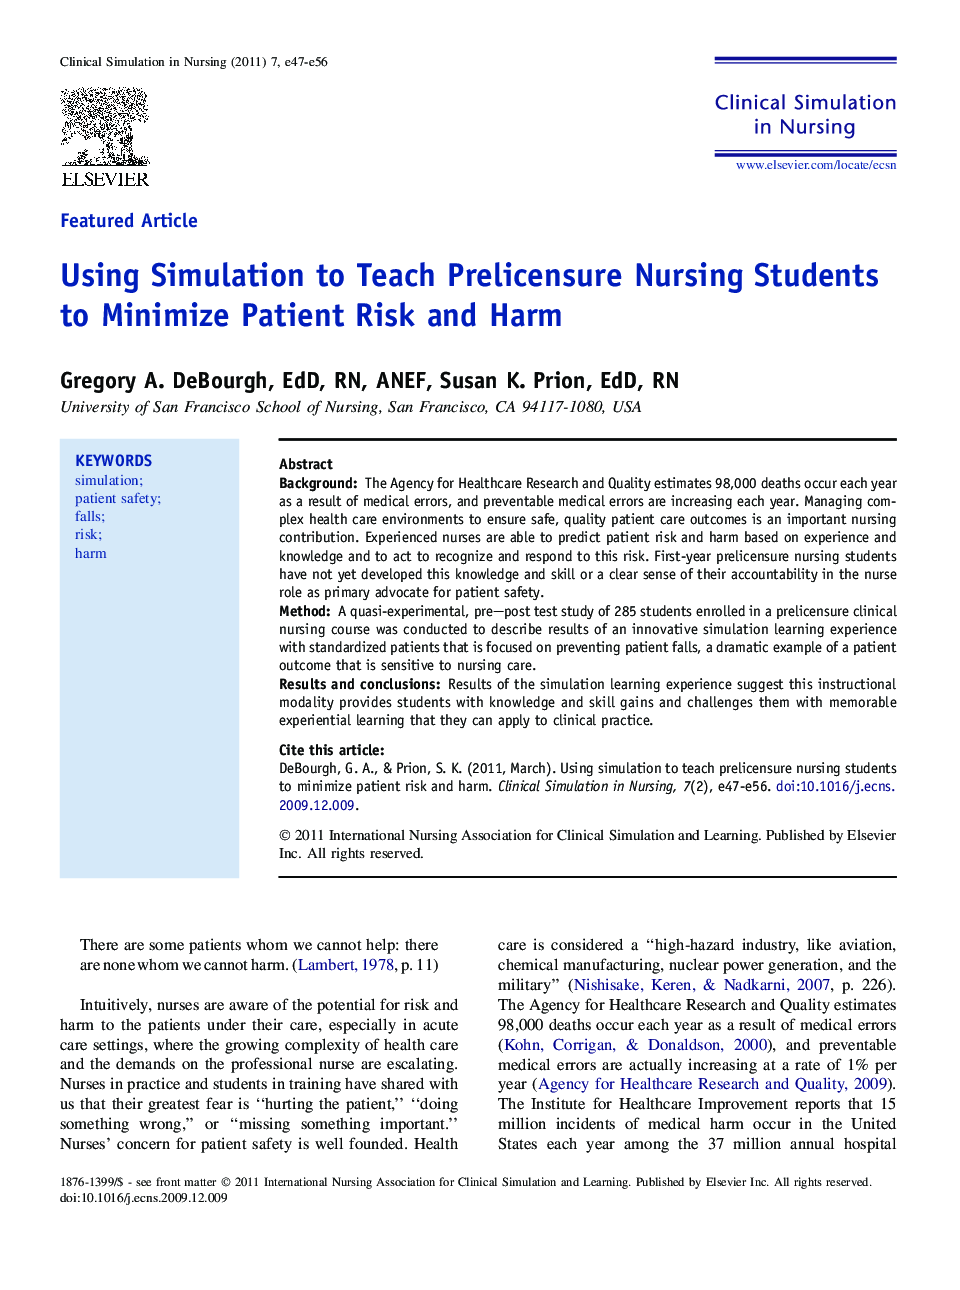 Using Simulation to Teach Prelicensure Nursing Students to Minimize Patient Risk and Harm 